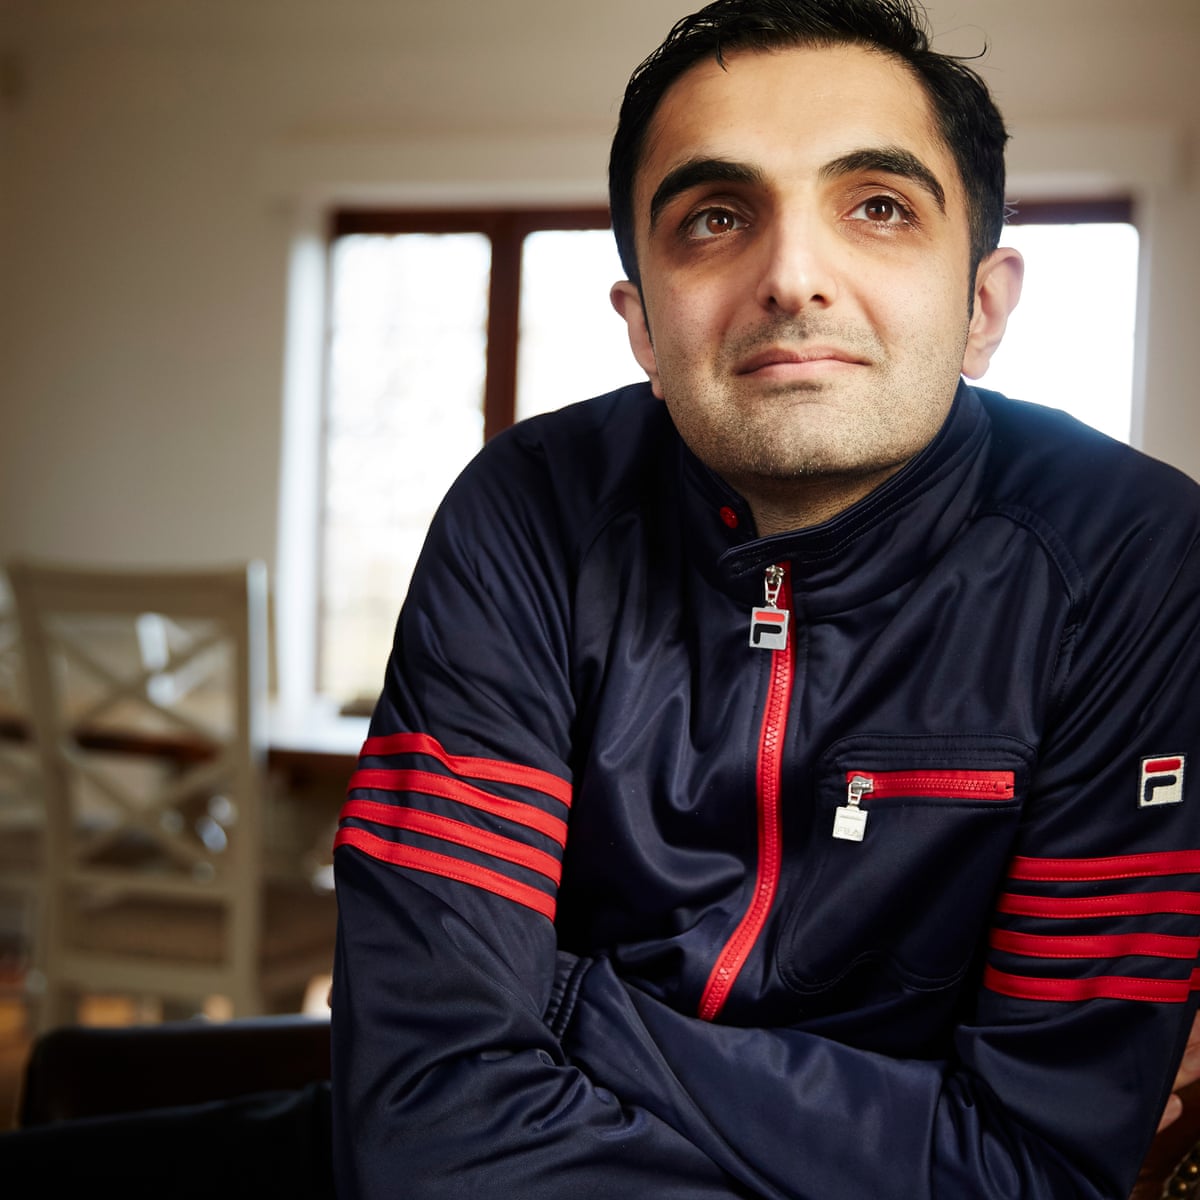 Sunjeev Sahota's book has been shortlisted for the 2021 Man Booker Prize